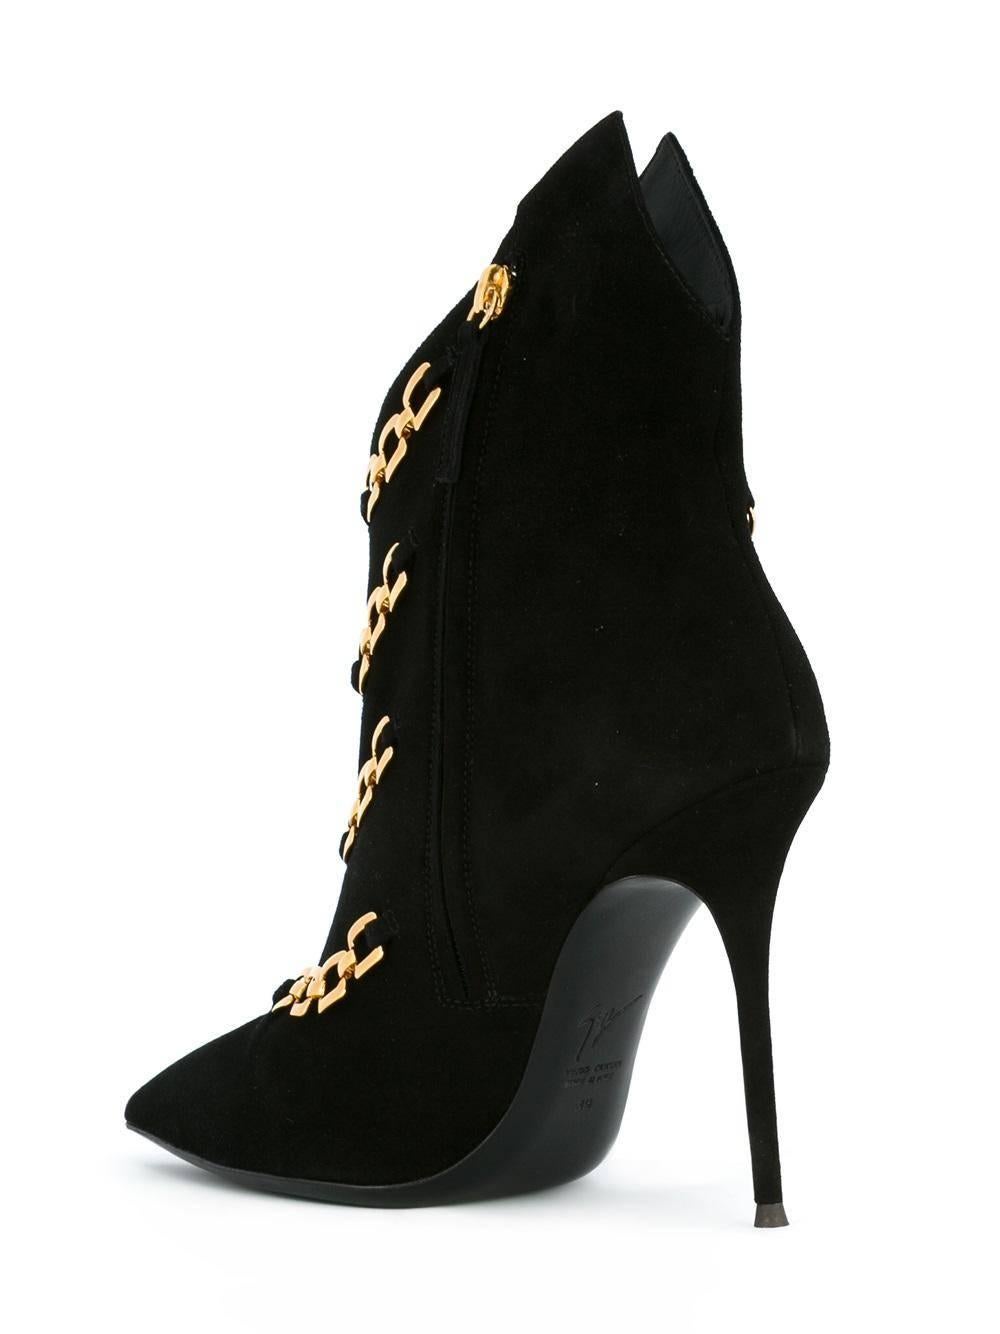 Women's Giuseppe Zanotti NEW & SOLD OUT Black Suede Gold Link Ankle Boots in Box